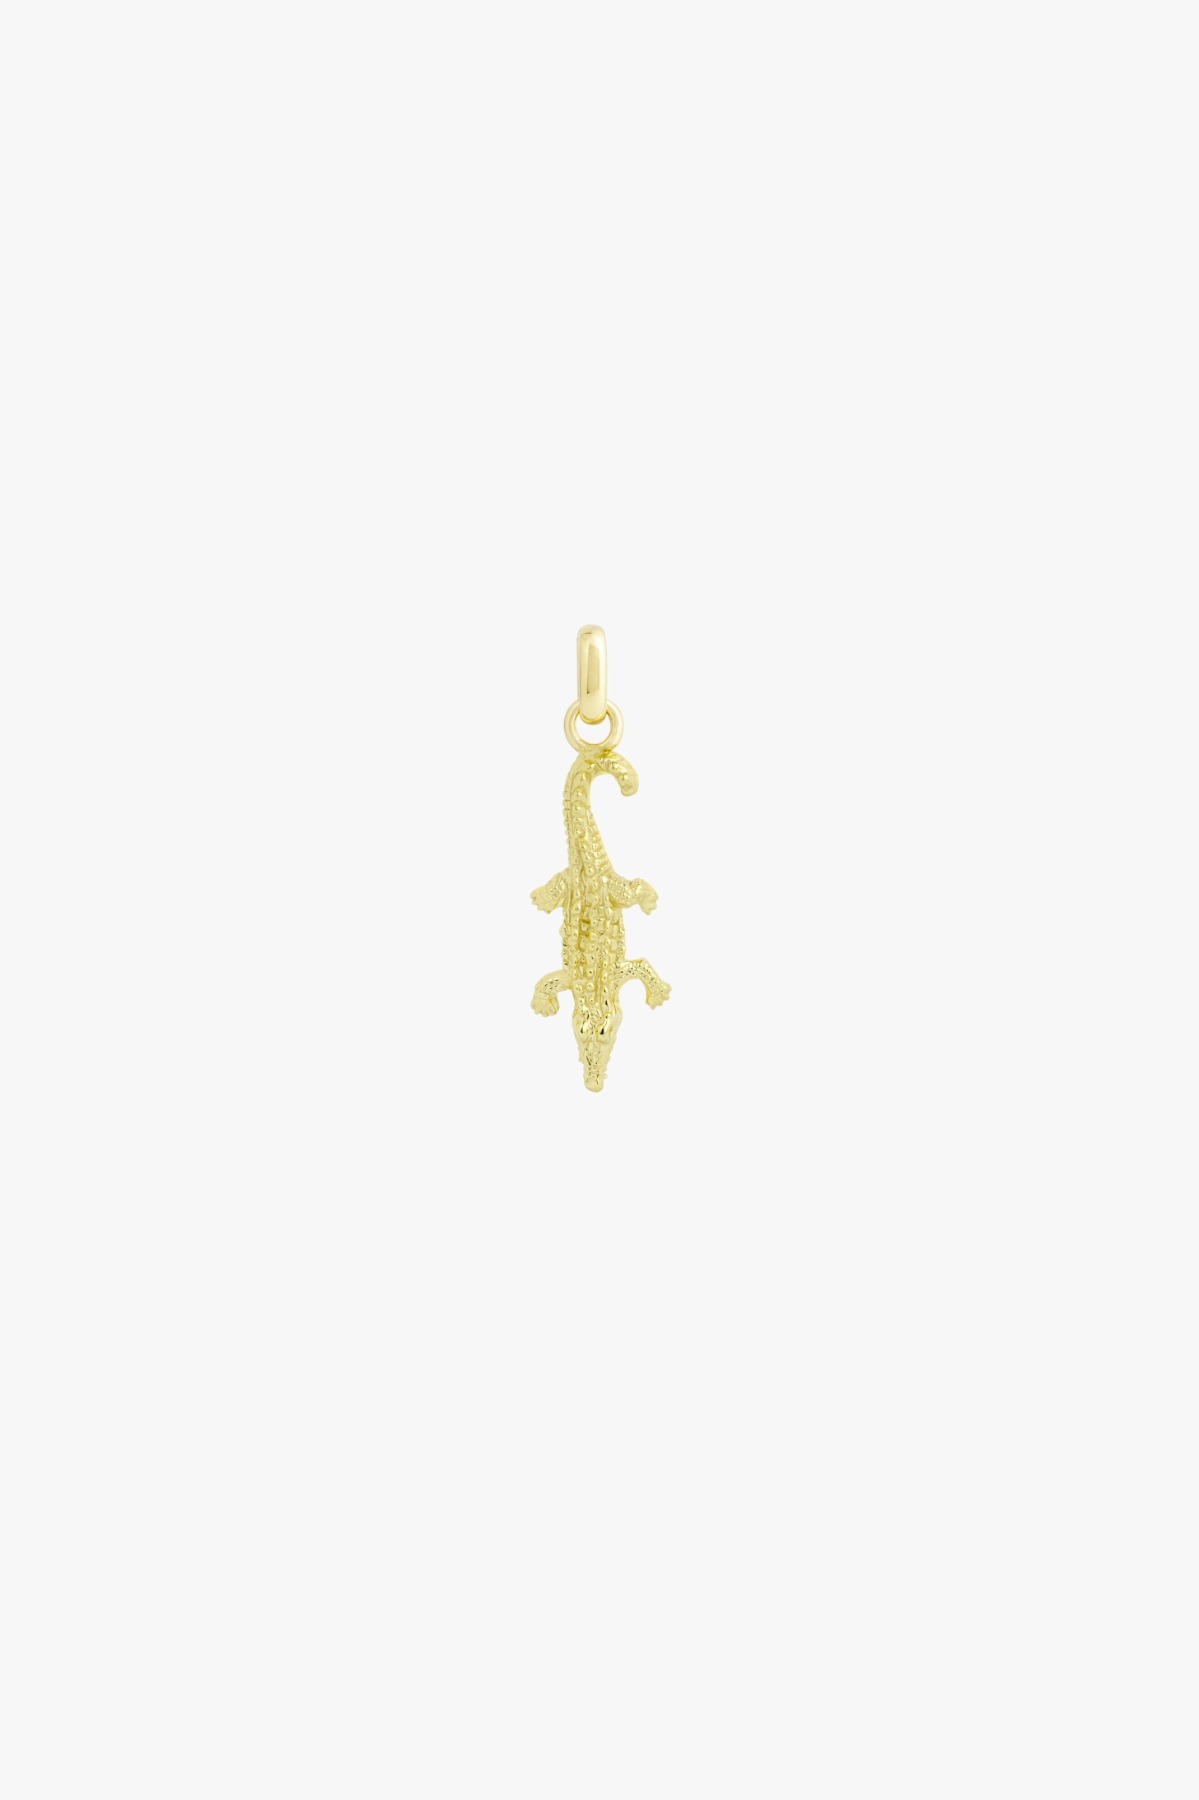 wildthings collectables - Crocodile pendant gold plated